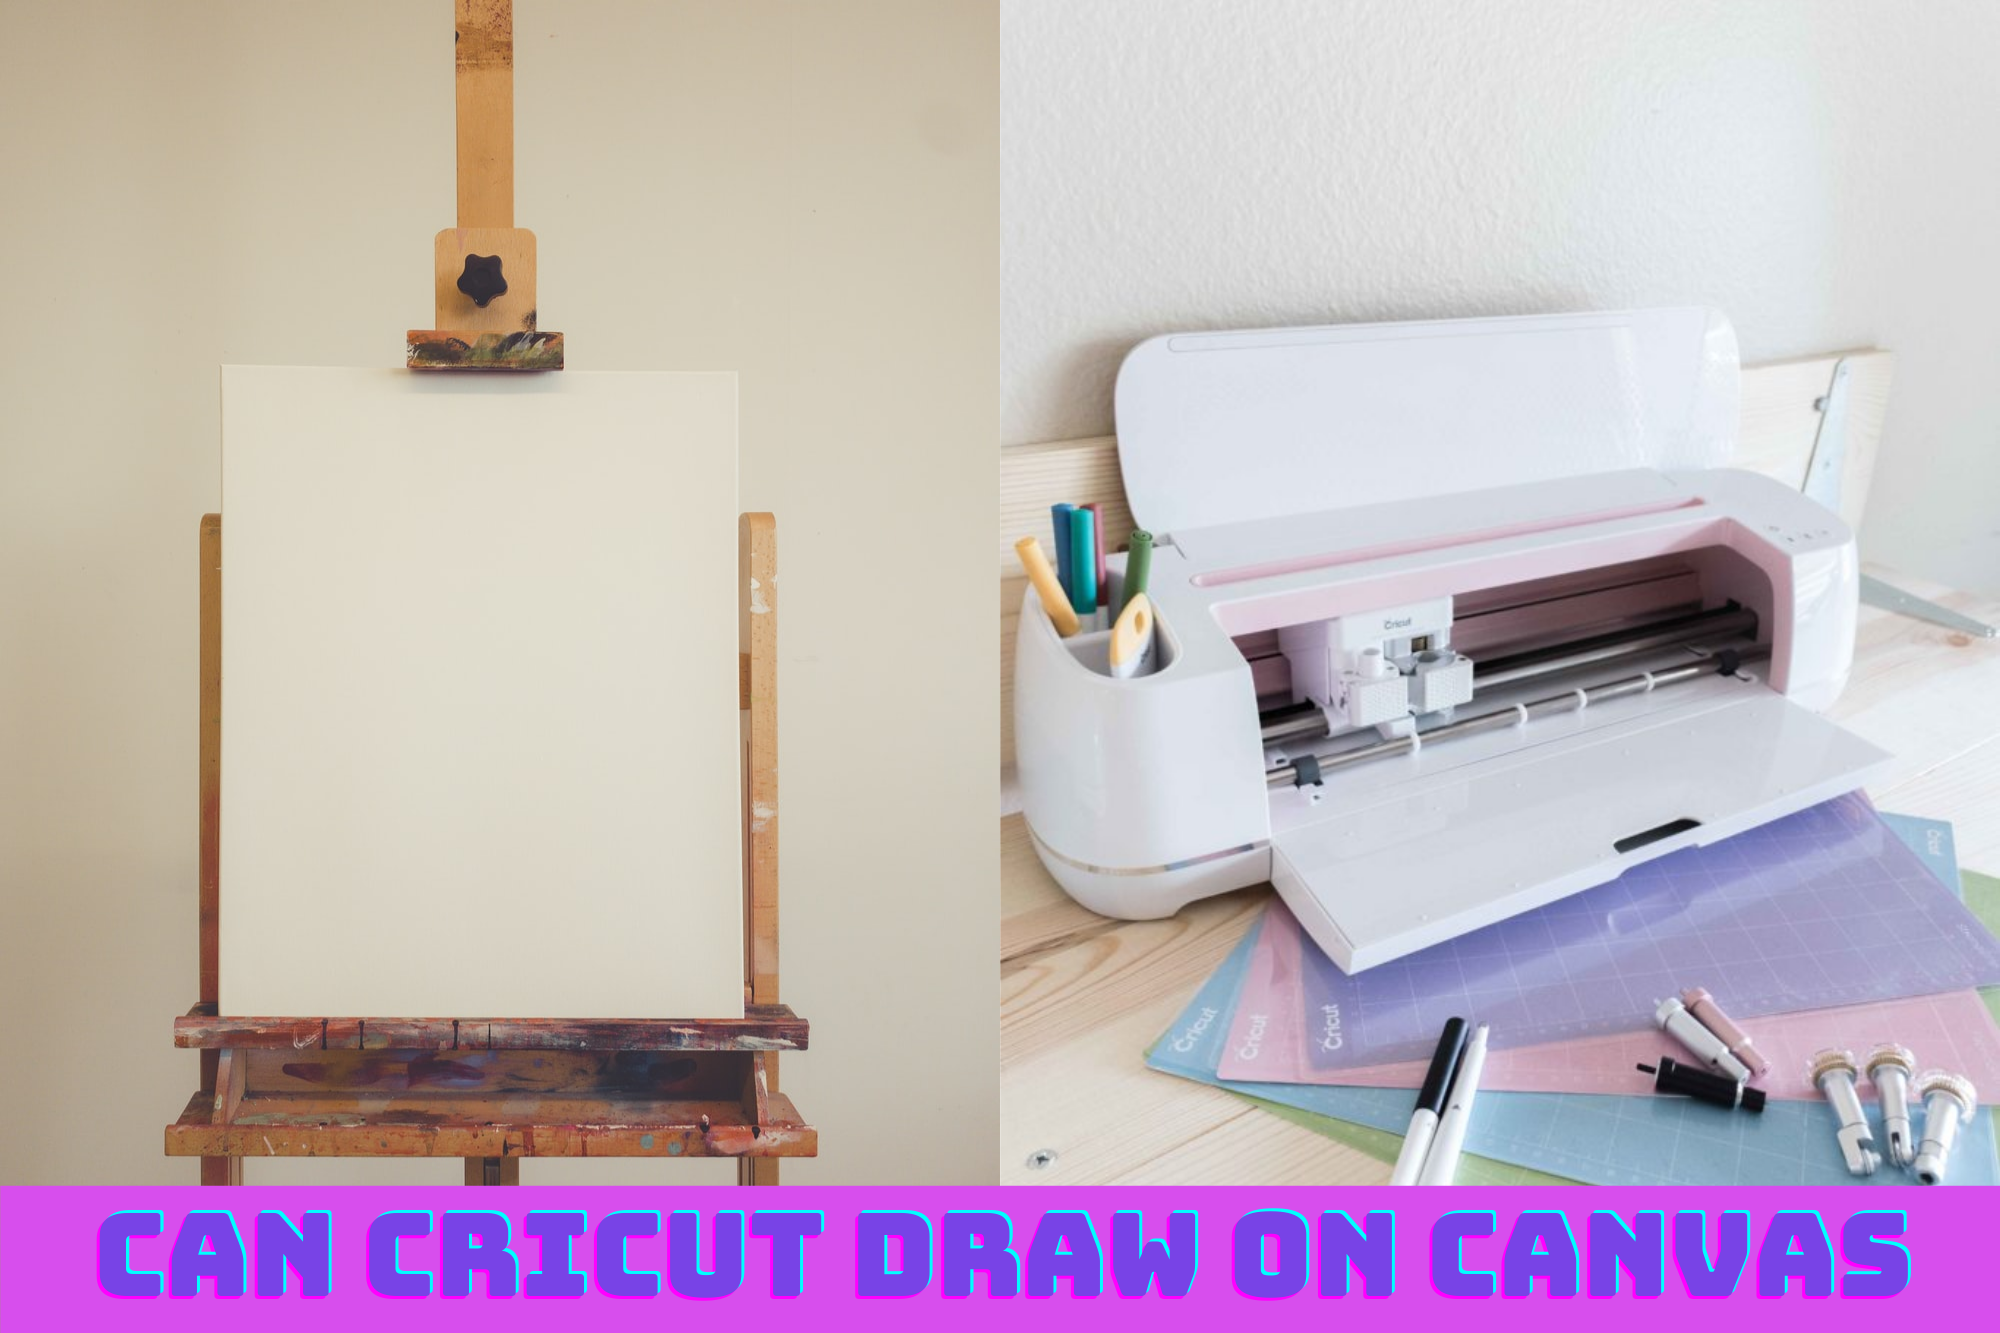 Can Cricut Draw On Canvas? What Systems Are Present In A Cricut? What Type Of Pens Can Be Used While Drawing With Cricut Machines On Canvas? What Variety Of Cricut Designs Can You Draw On Canvas? How Do I Make My Cricut Drawing On Canvas Perfect?